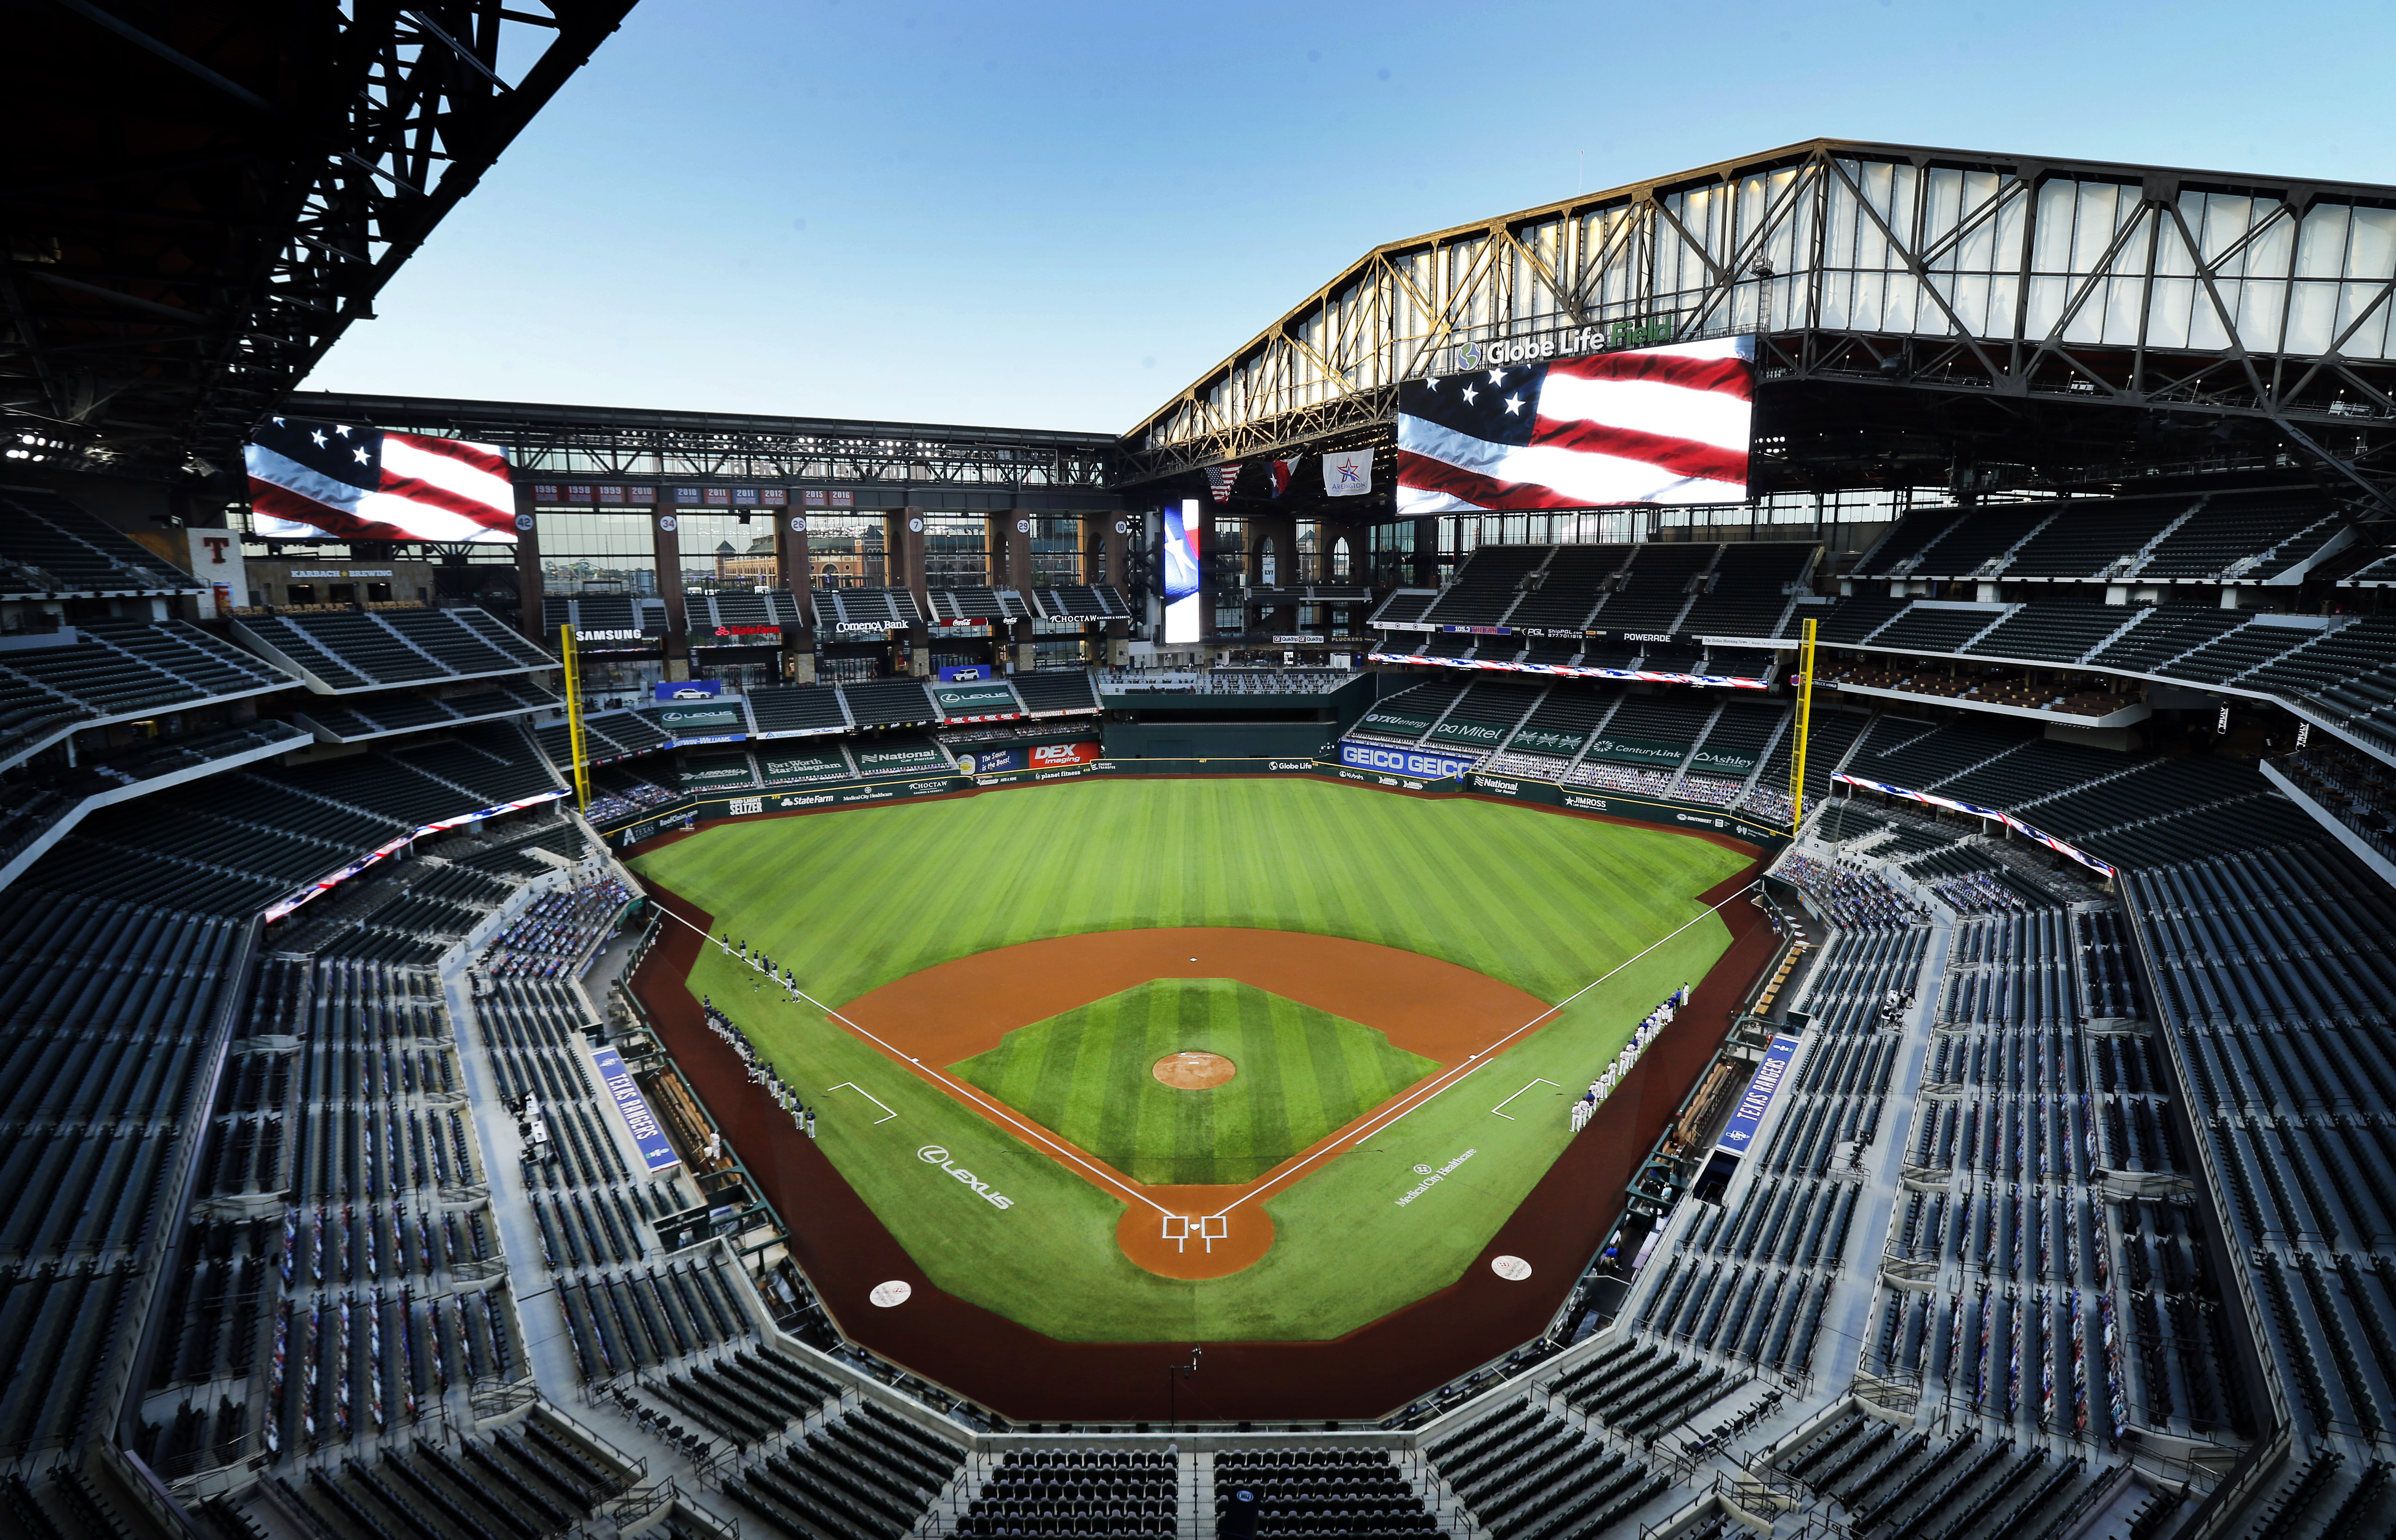 Rangers played with Globe Life Field's roof open and the results